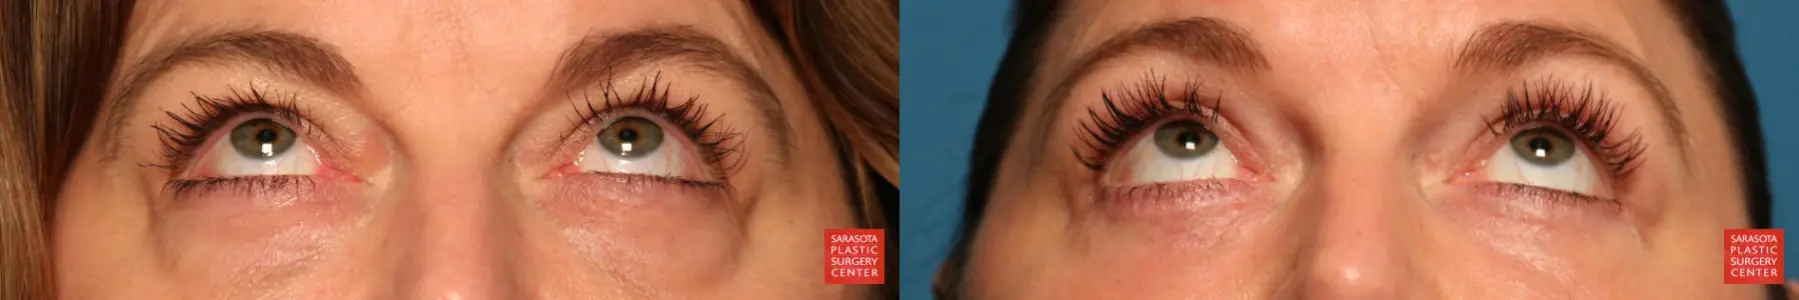 Eyelid Lift: Patient 6 - Before and After 3